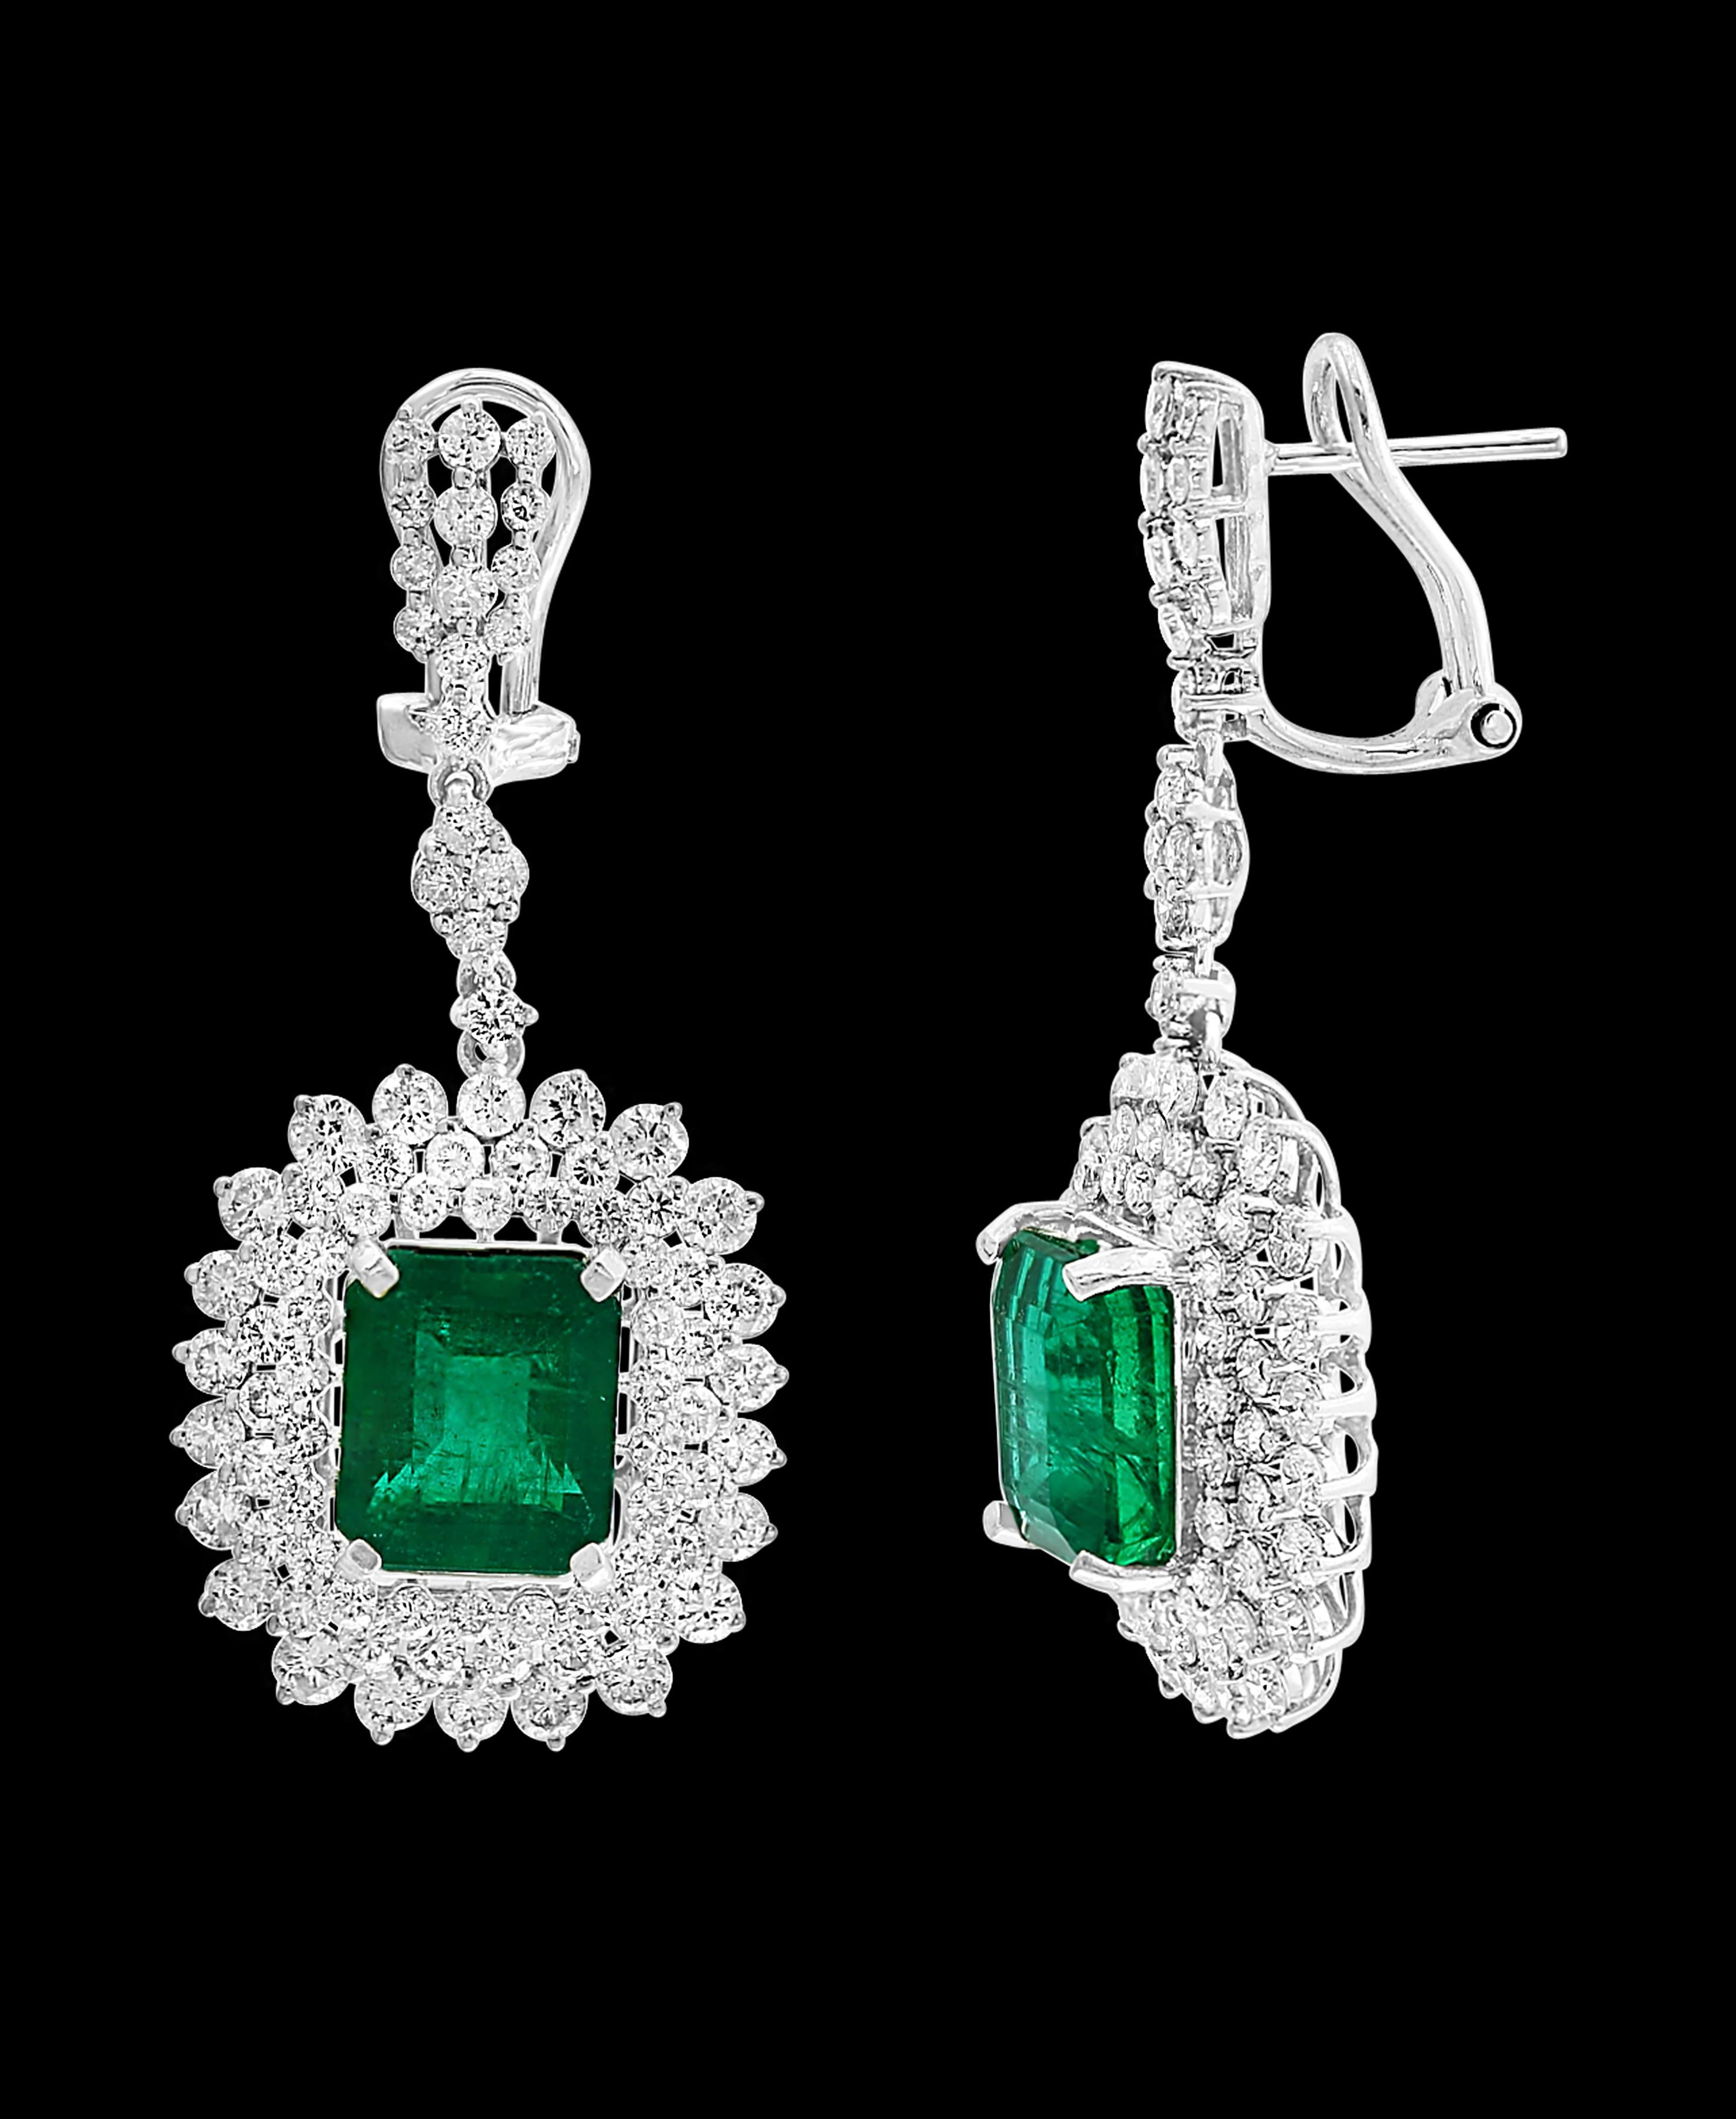 9 Carat Colombian Emerald Cut Emerald Diamond  Hanging Earrings 18 K White Gold
This exquisite pair of earrings are beautifully crafted with 18 karat White gold  weighing   9 grams
Two fine Natural  Colombian  Emerald  Cut Emeralds weighing